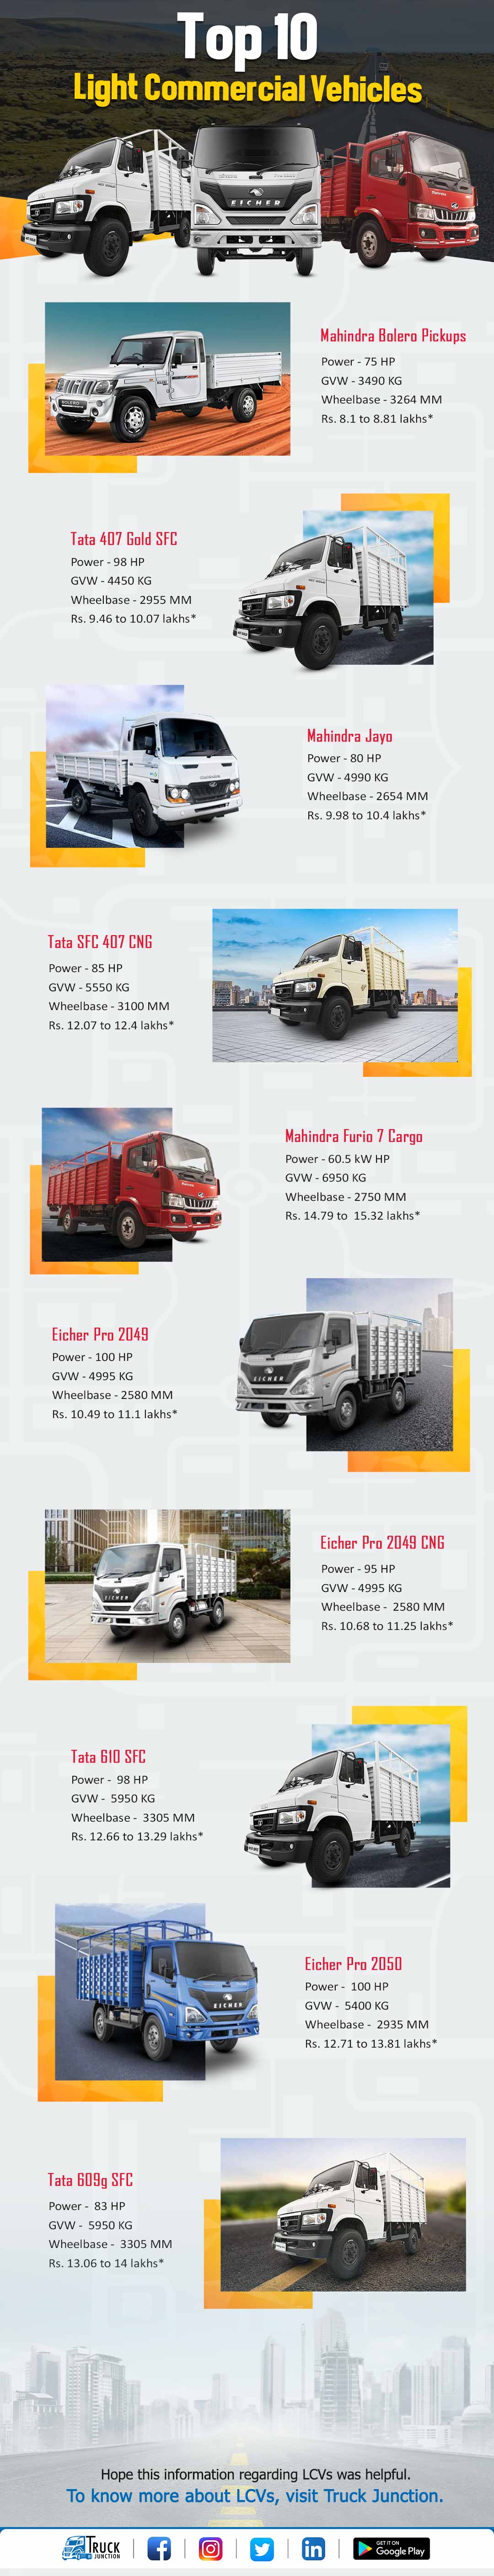 Top 10 Light Commercial Vehicles in India infographic 